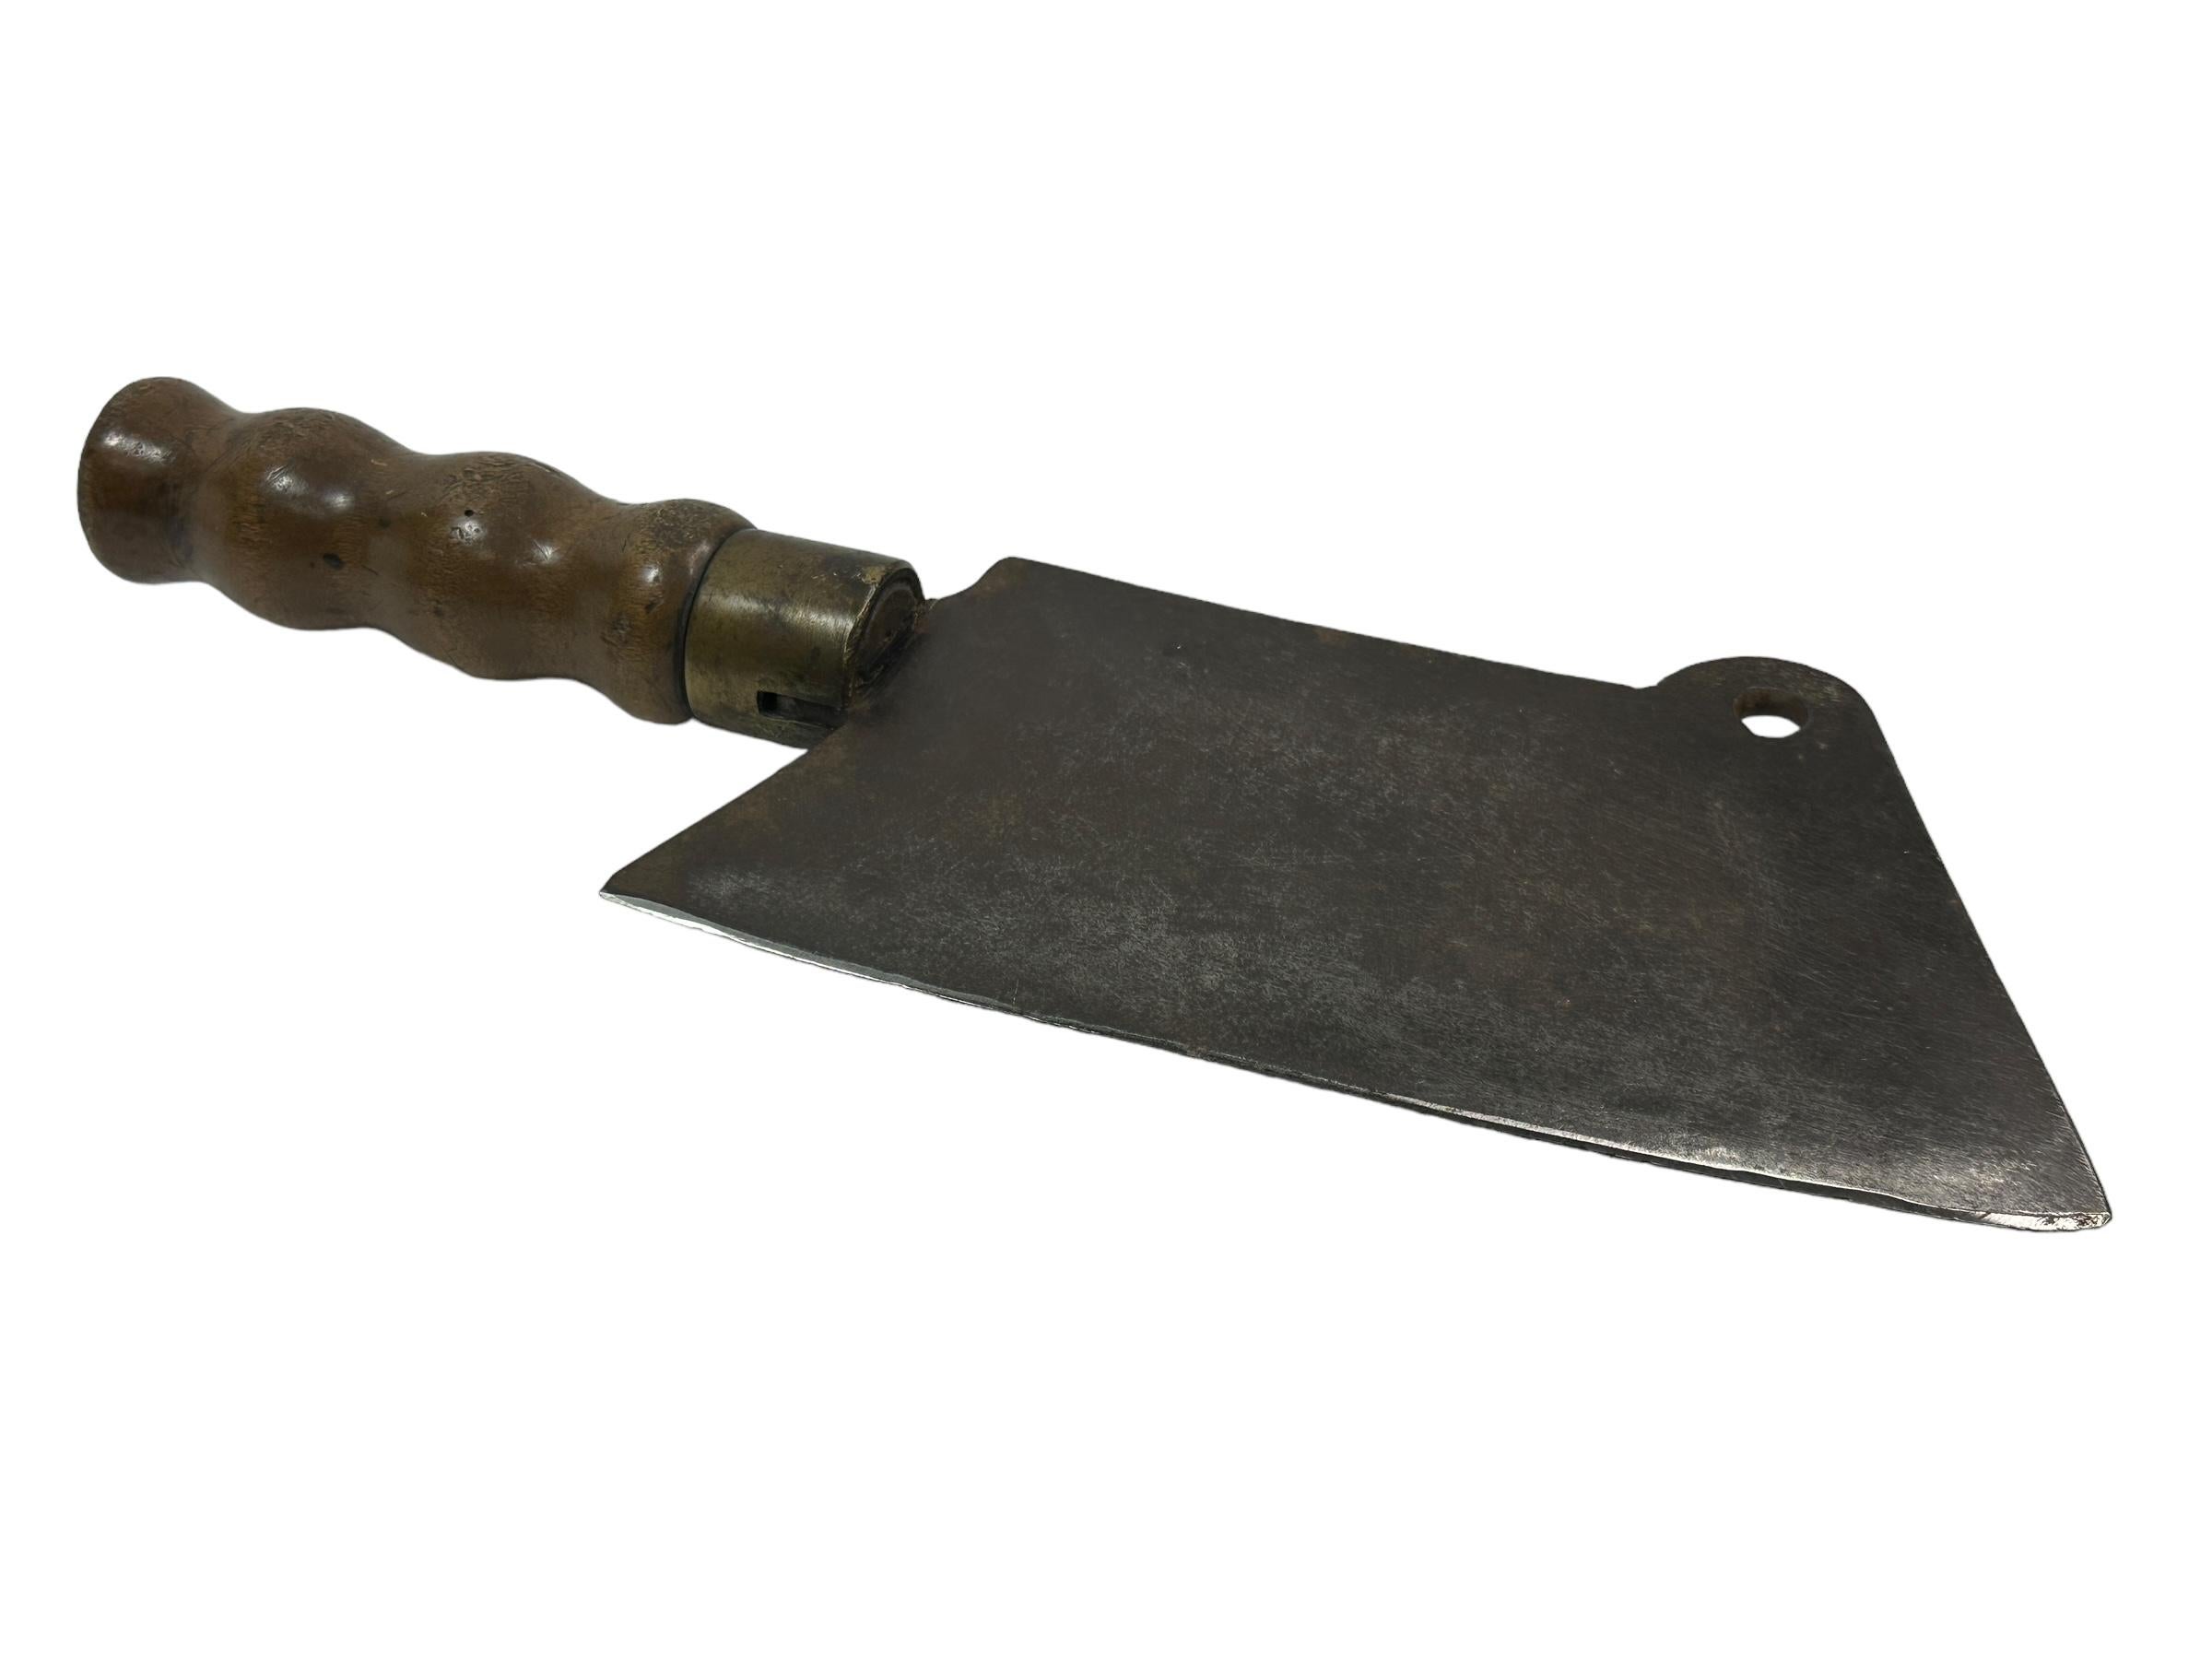 Highly Decorative 19th Century European German Cleaver, Kitchen Butcher Utensil For Sale 1